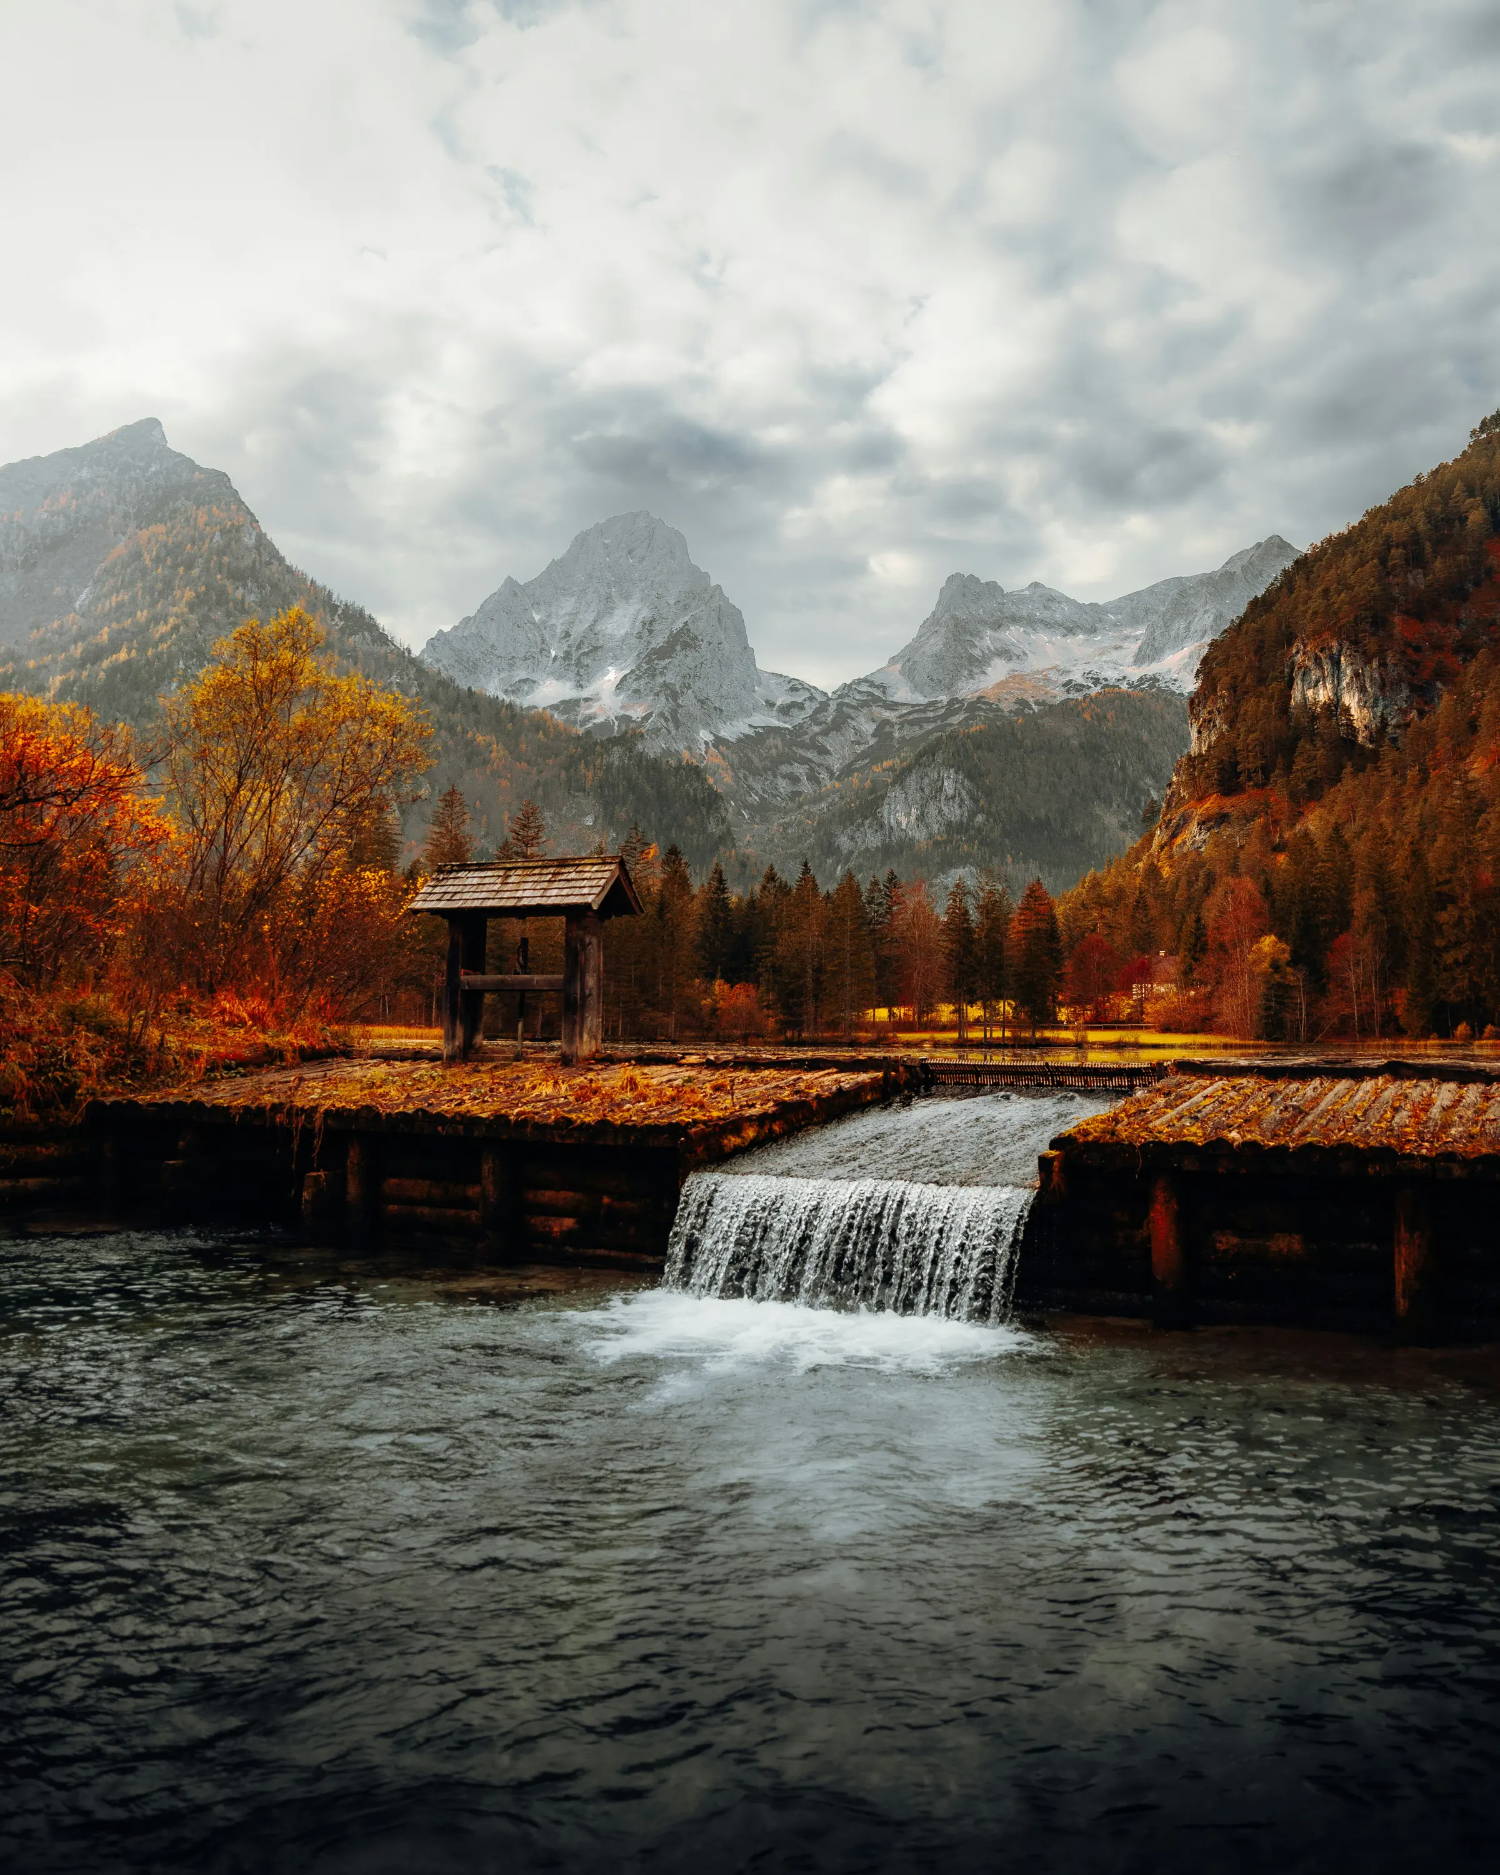 A mountain range with autumn-colored trees and a waterfall in the foreground